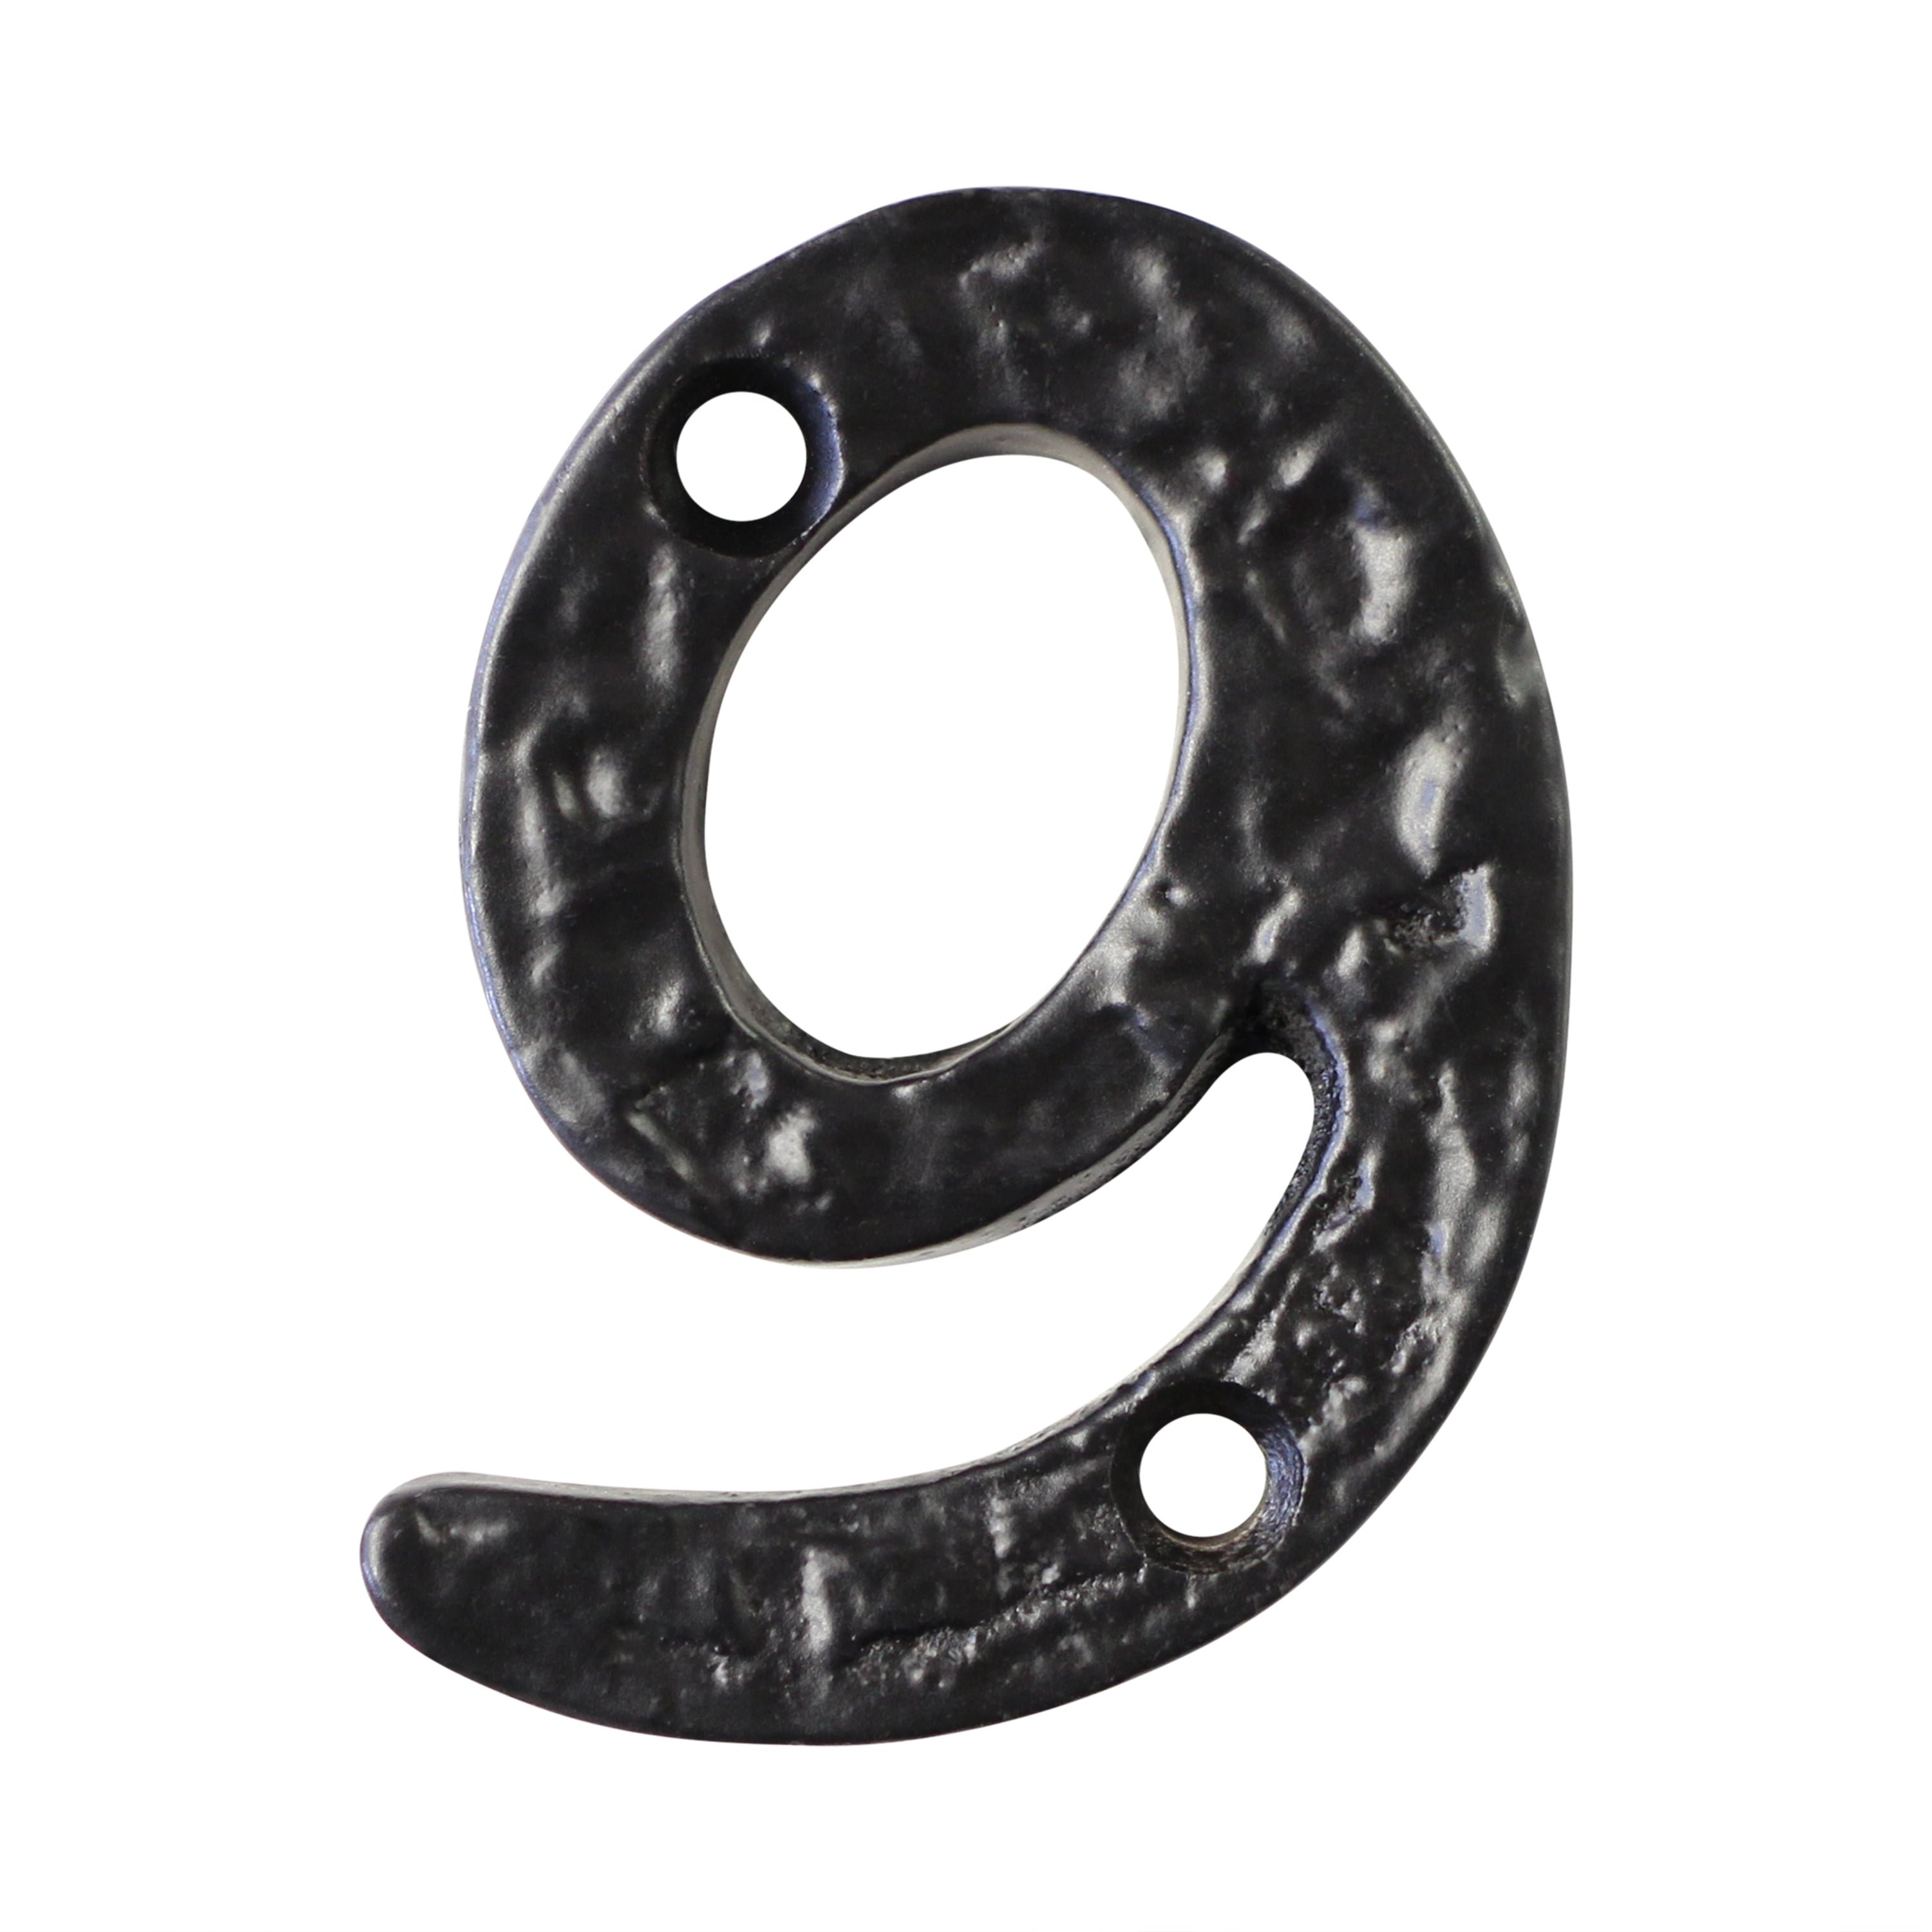 100mm AVAILABLE IN BLACK. TWO PLASTIC DOOR NUMBERS